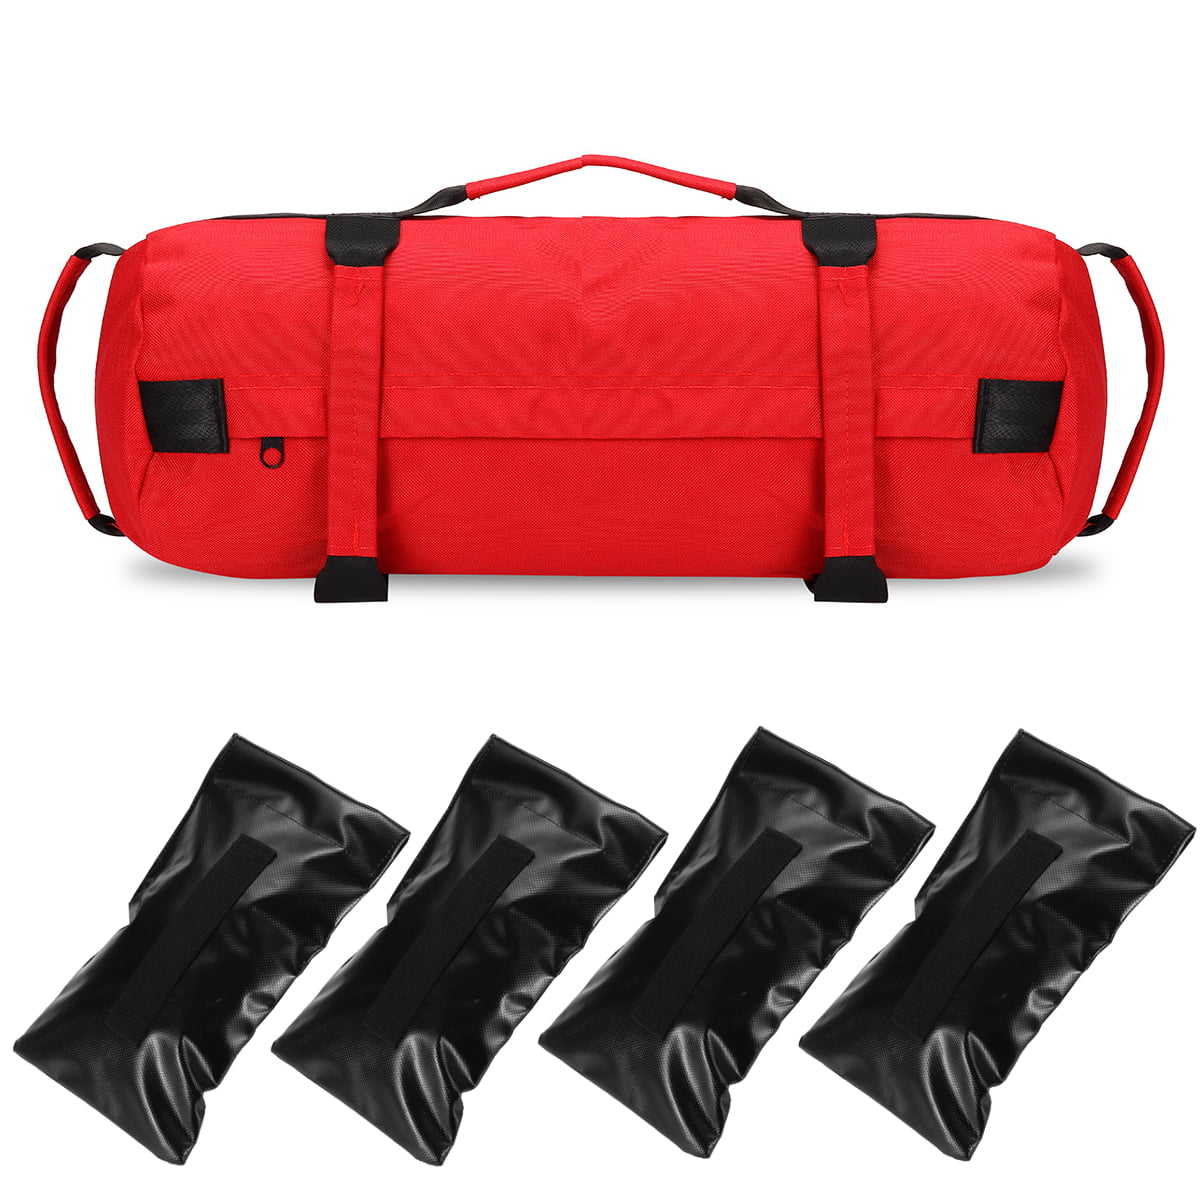 Training Weight Bags Estleys Workout Sandbag for Fitness 10 to 40 Lbs Adjustable Military Sandbags with 4 and 2 Inner Bags Full Body Exercise Equipment with Filler Bag 